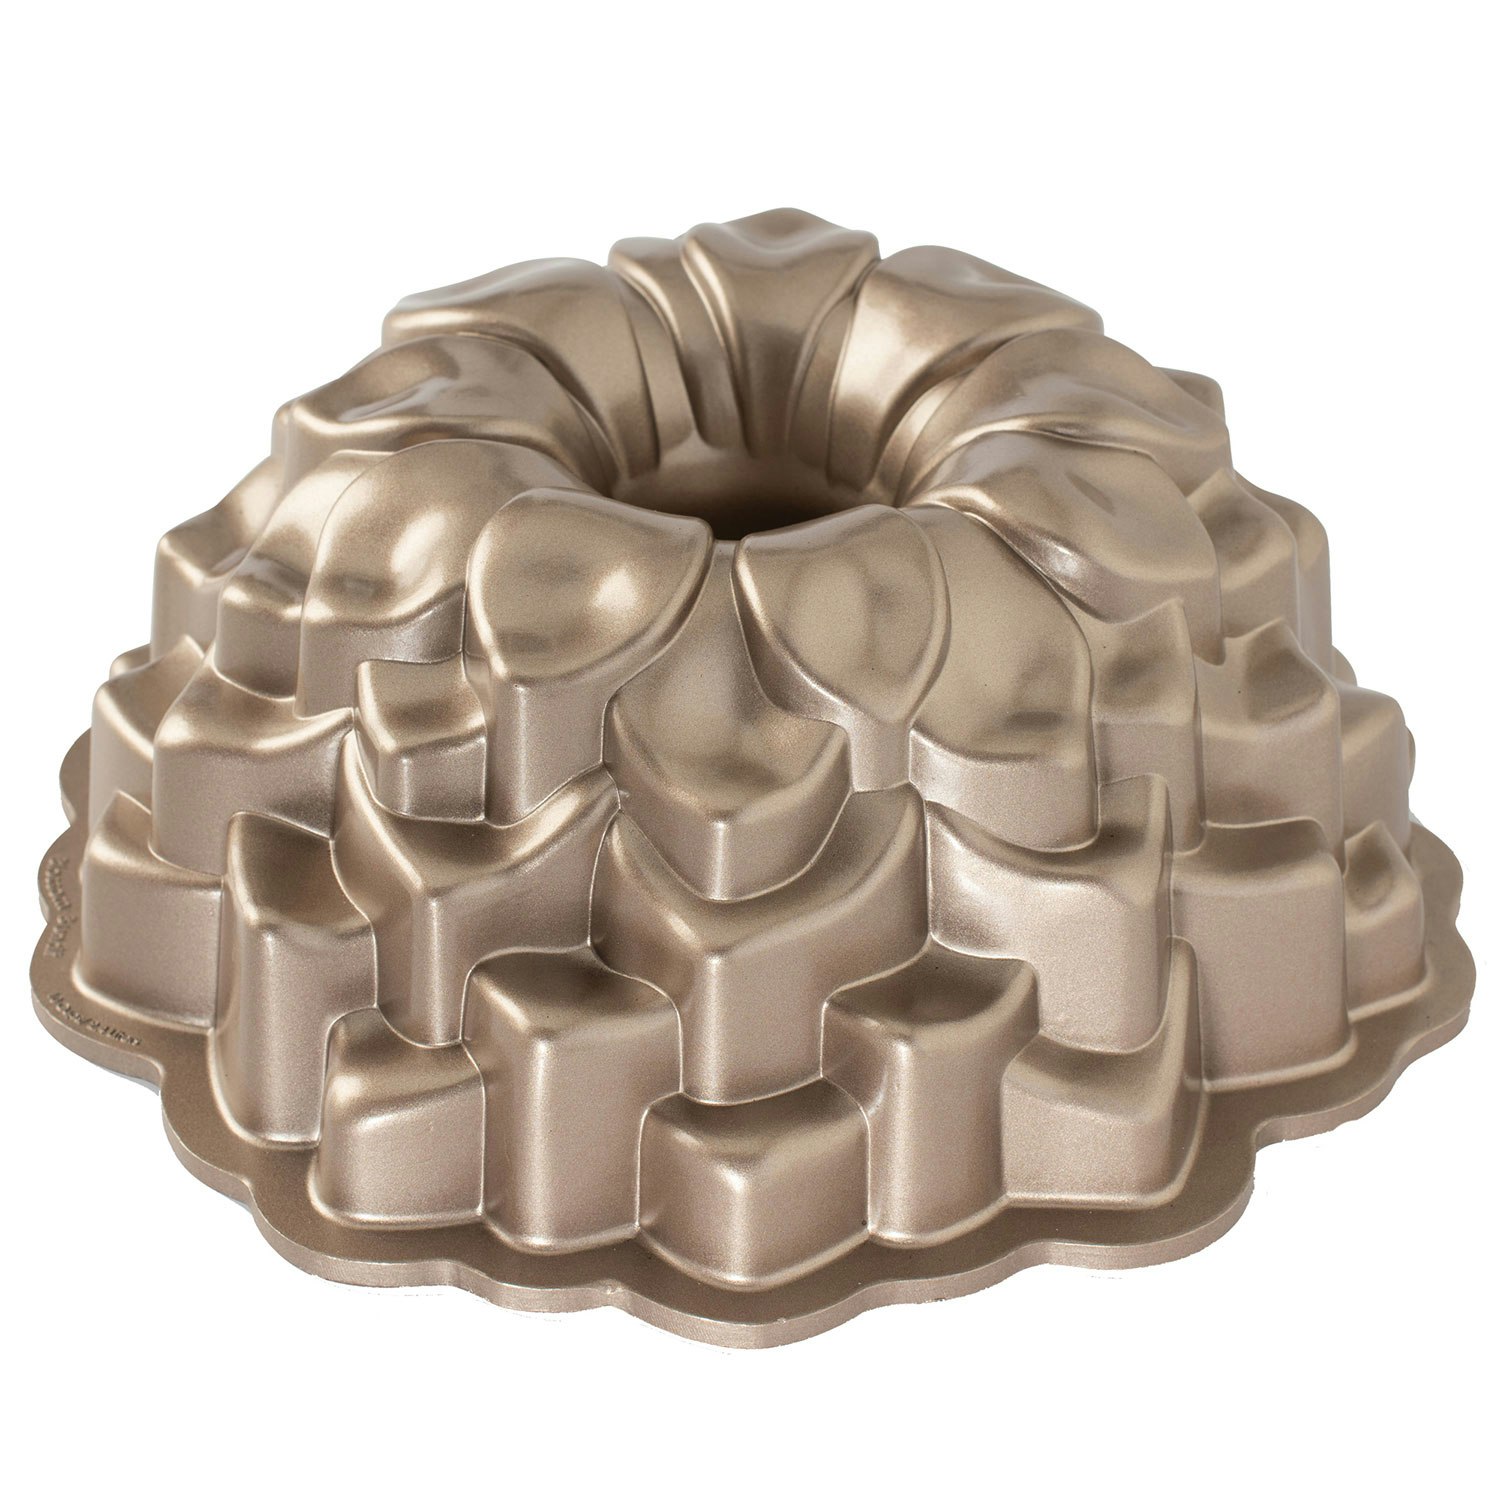 Classic Fluted, Loaf Pan - Nordic Ware @ RoyalDesign